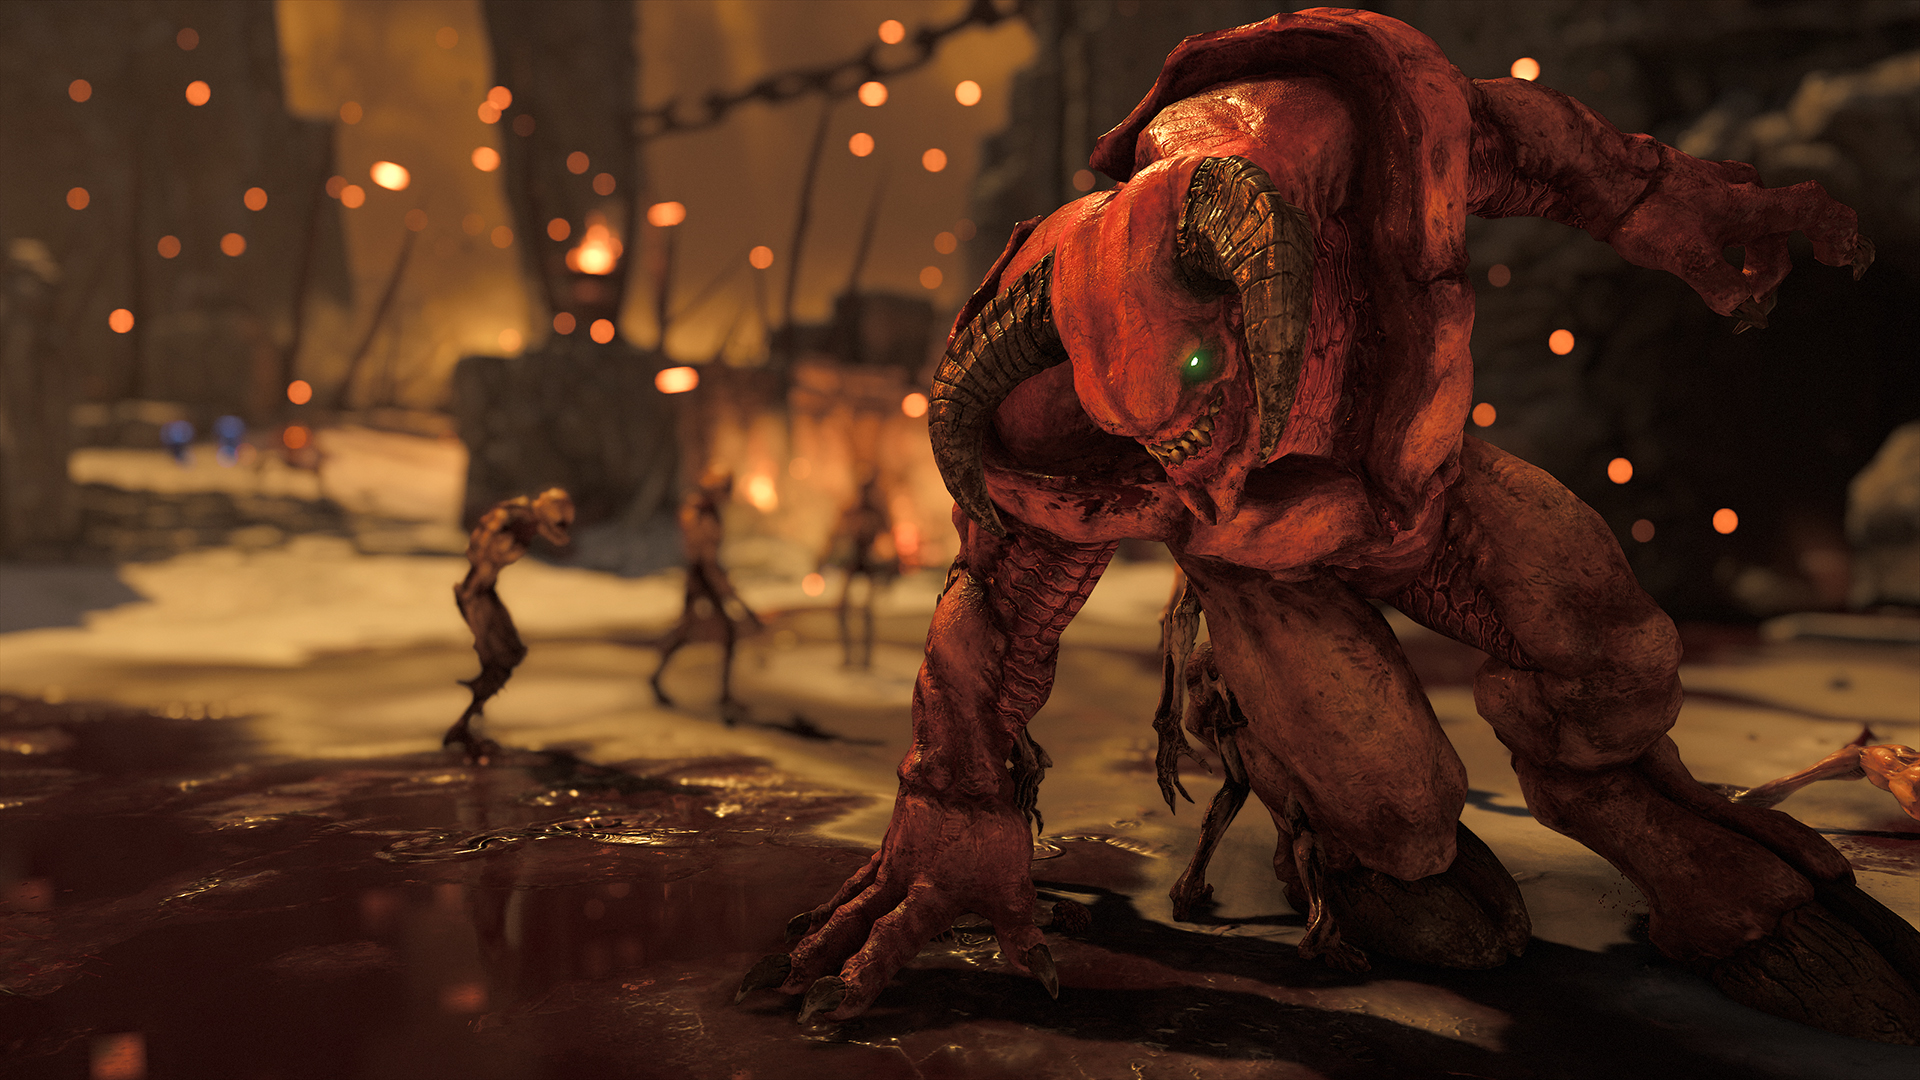 Doom Photo Mode Gives You A Distressingly Good Look At Demon Head Holes